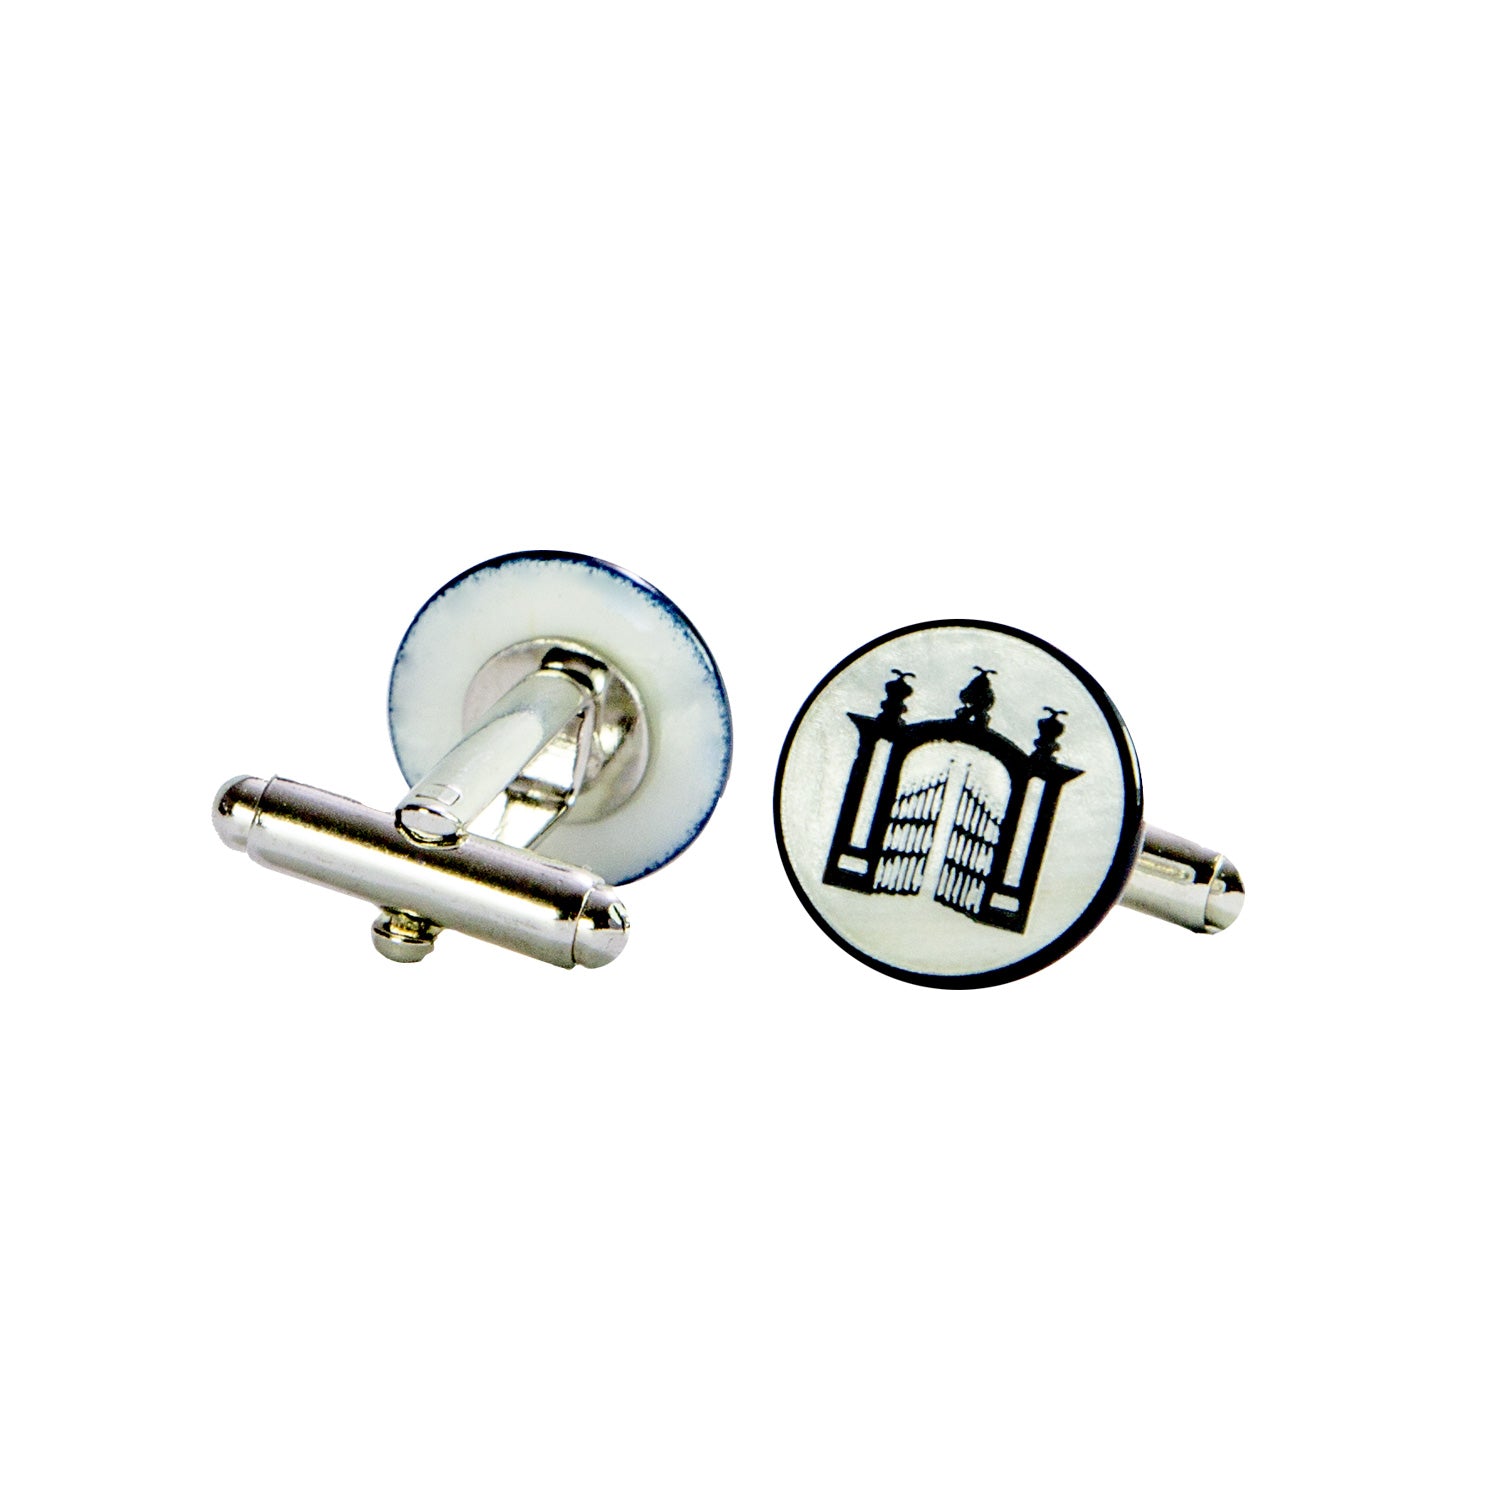 DARIO’S Couture mother of pearl Cufflinks with personalization